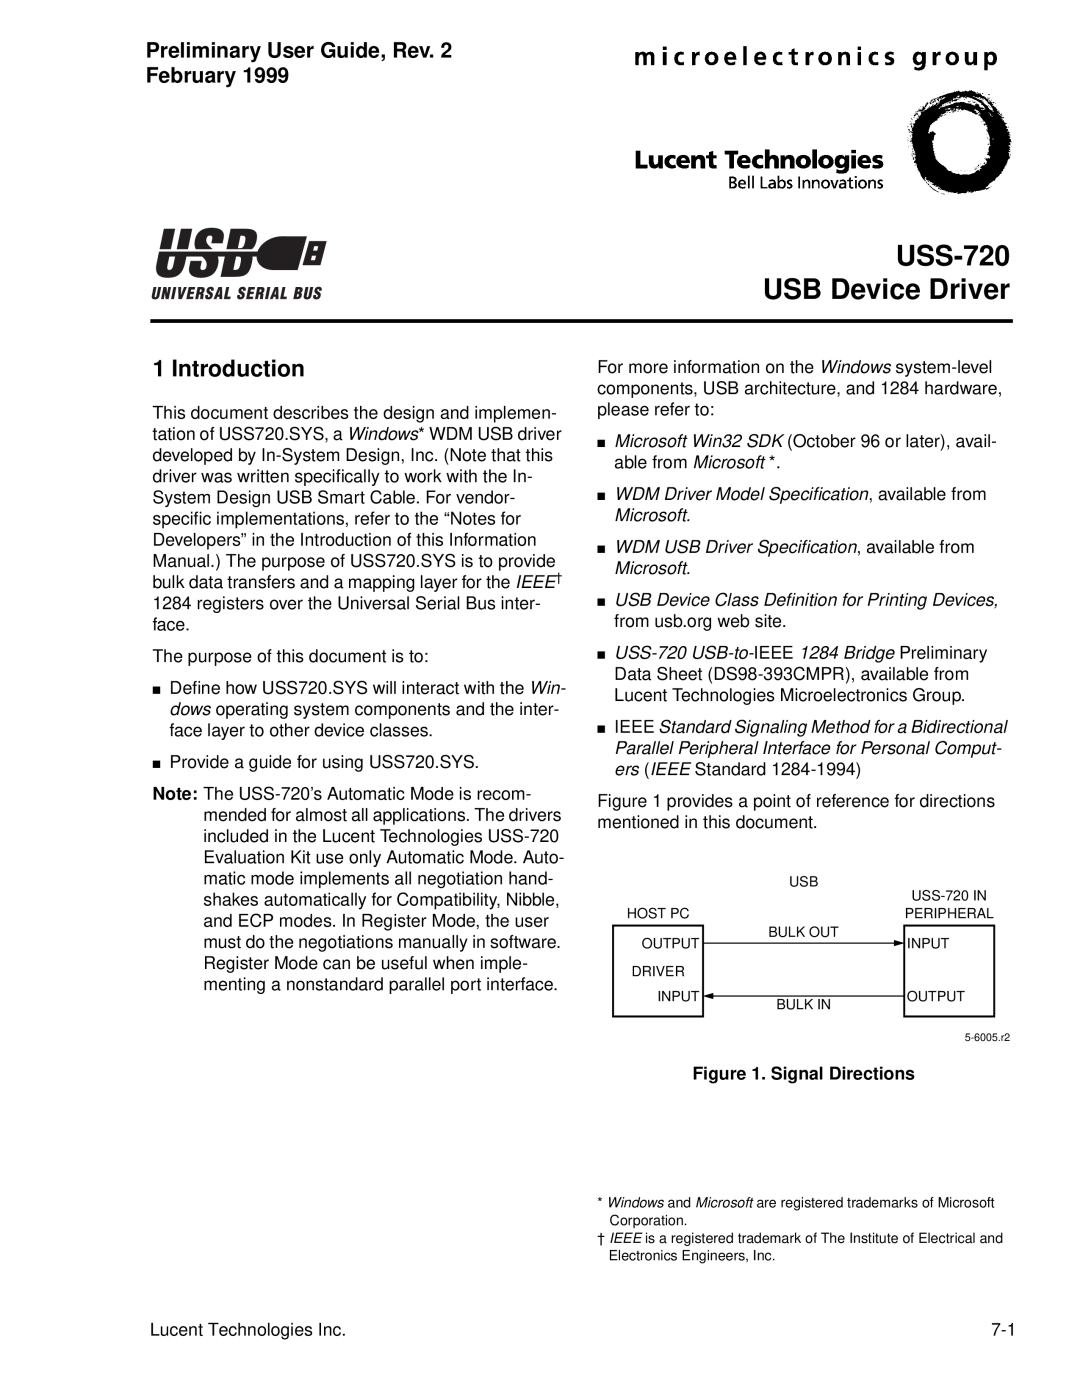 Lucent Technologies manual USS-720 USB Device Driver, Introduction, Preliminary User Guide, Rev February 